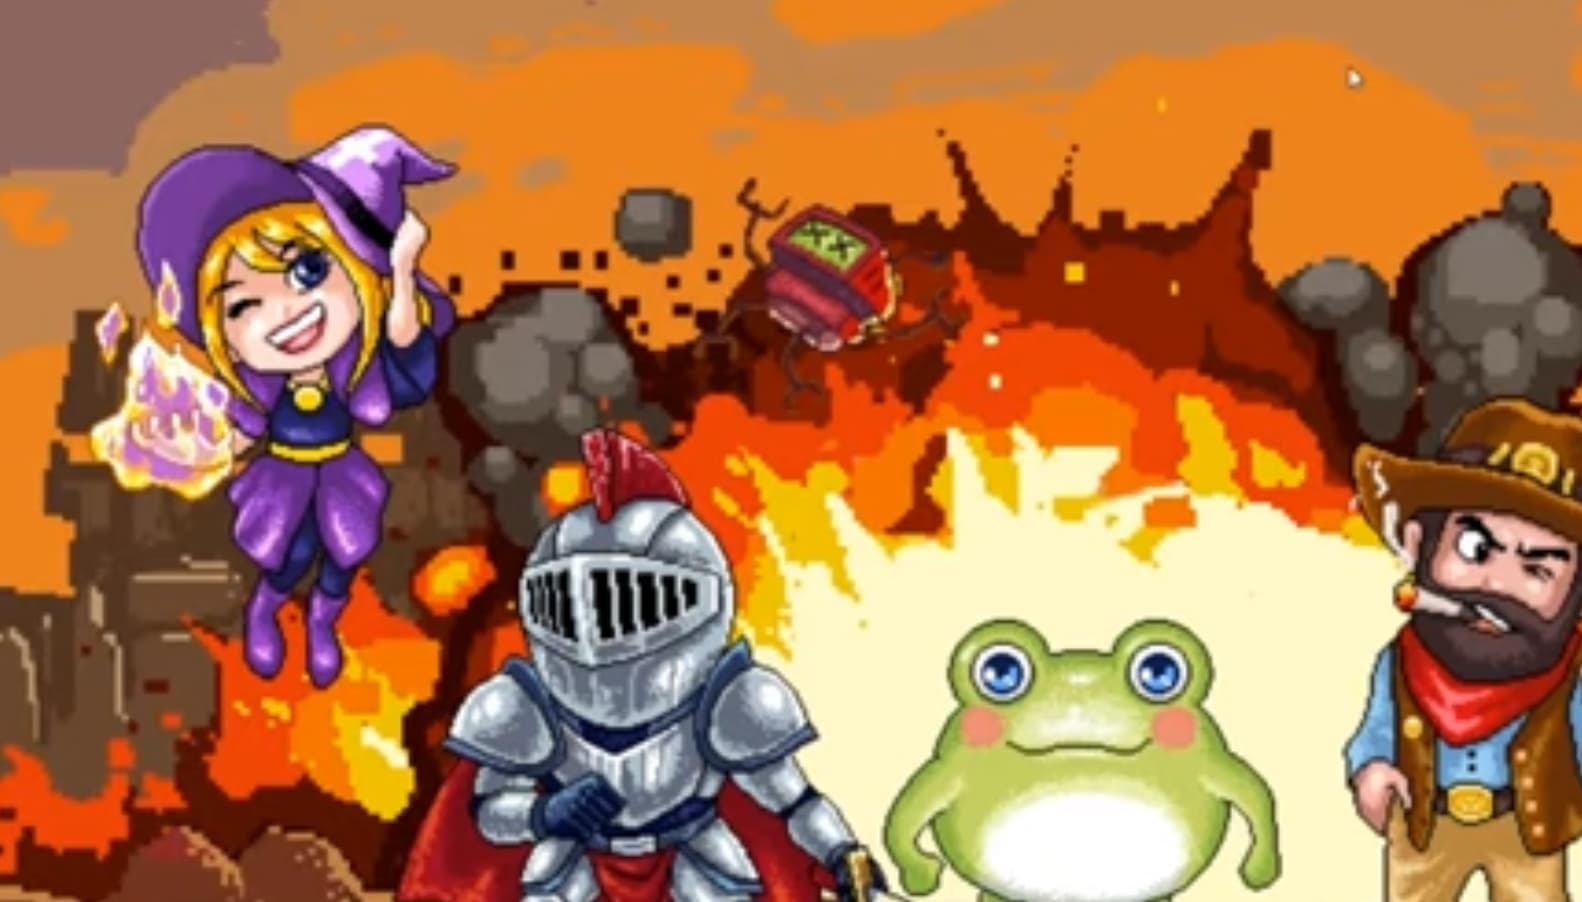 a witch, knight, frog, and cowboy against a volcanic eruption